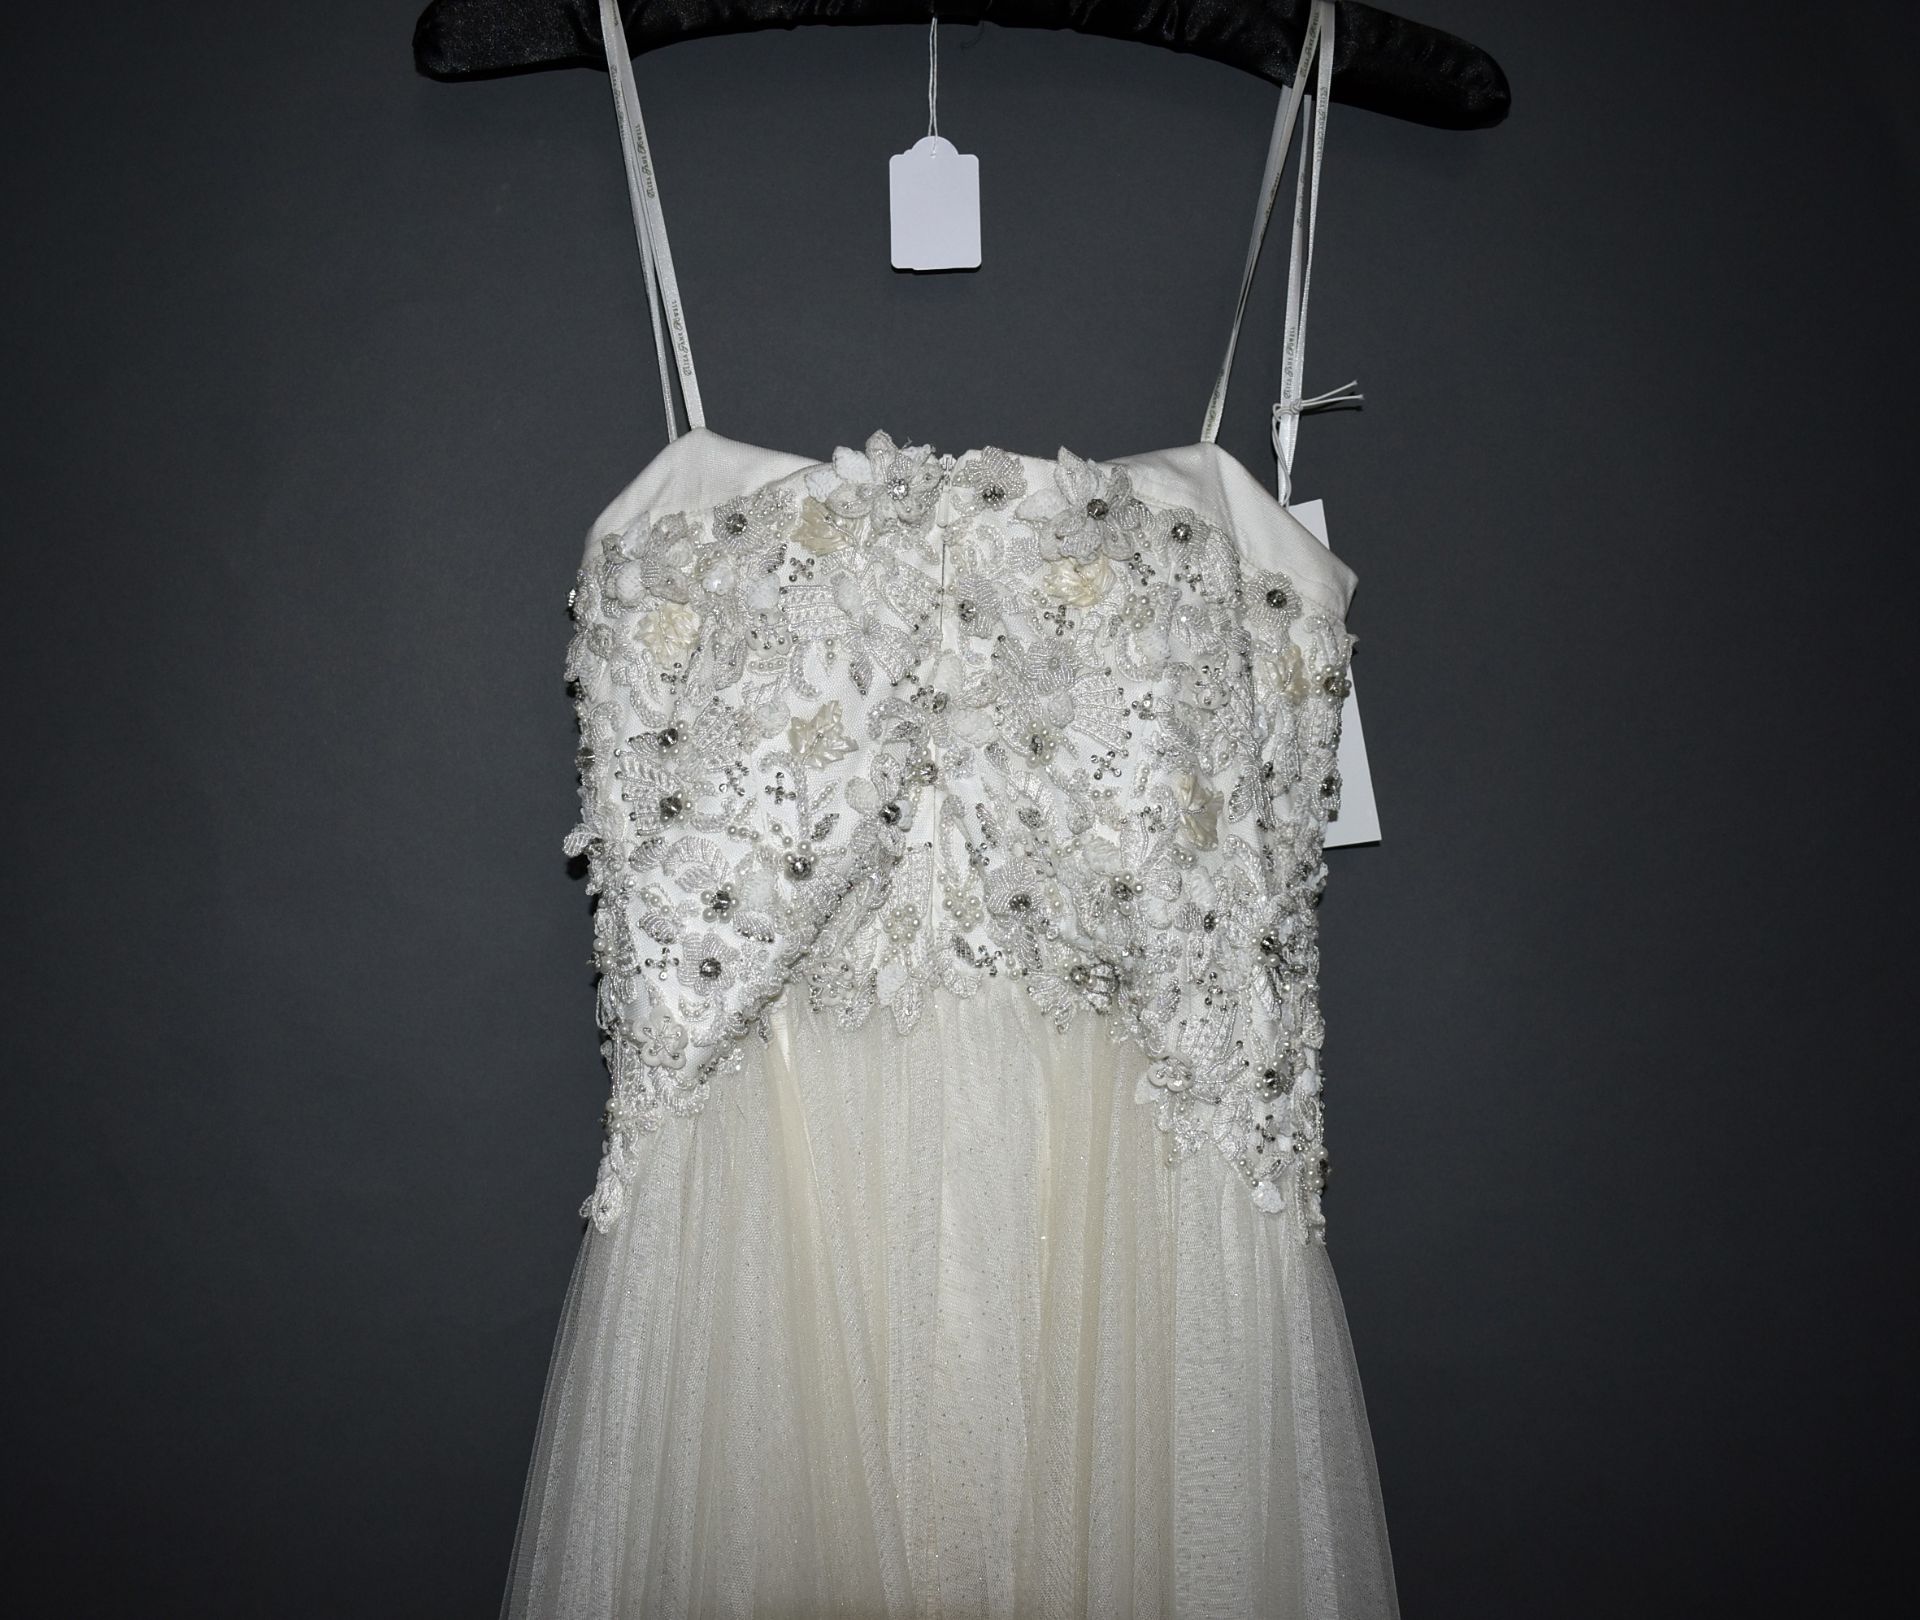 1 x ELIZA JANE HOWELL Lace And Beaded Strapless Designer Wedding Dress Bridal Gown RRP £1,000 UK 12 - Image 4 of 7